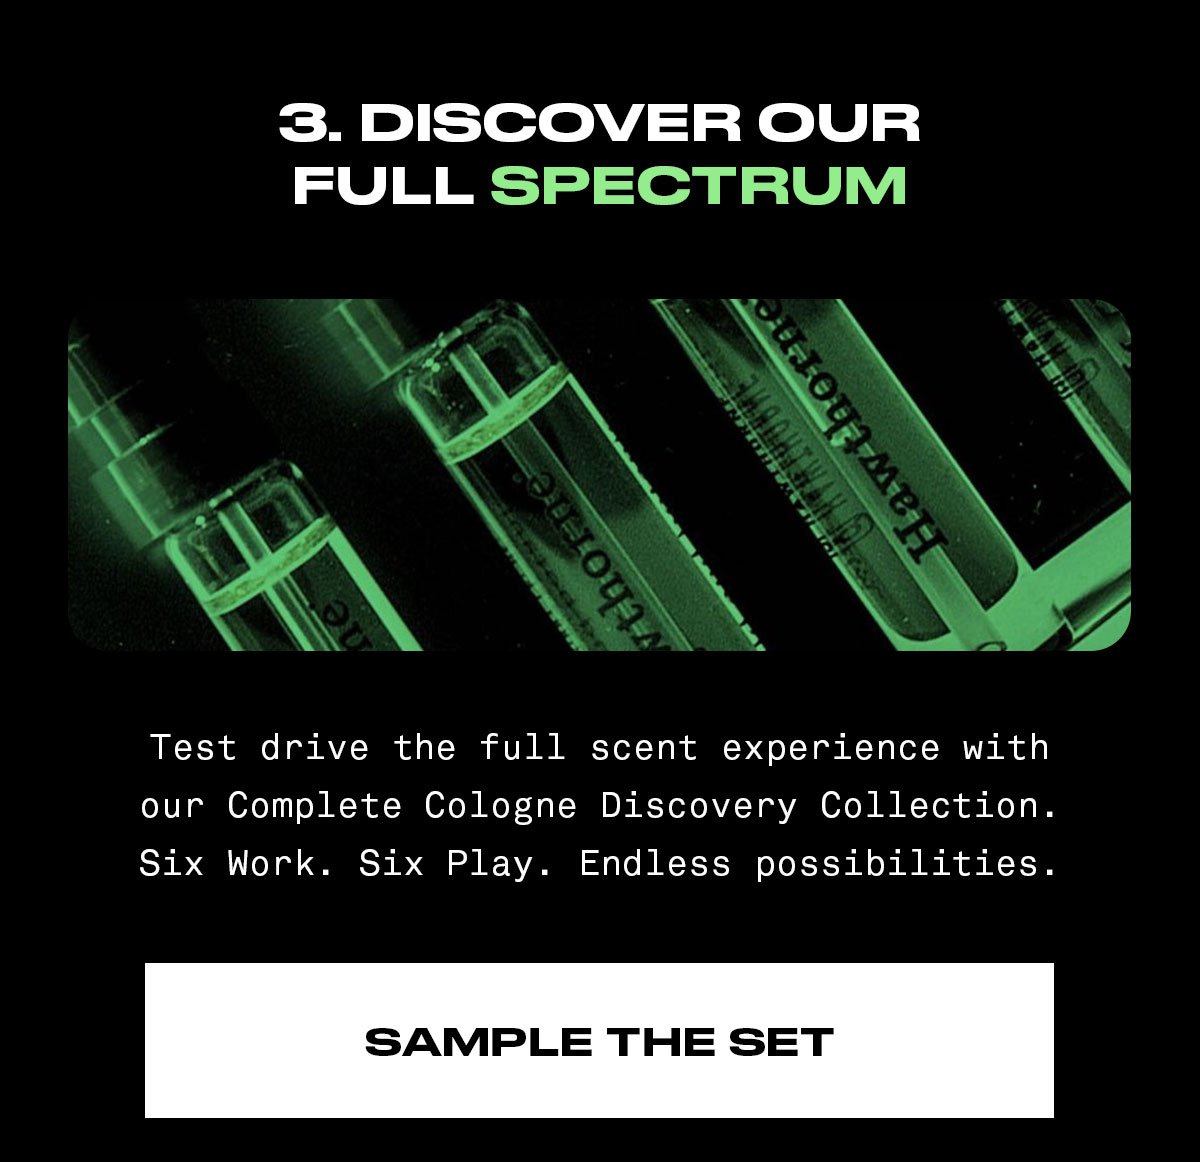 Discover our full spectrum. Test drive the full scent experience with our Complete Cologne Discovery Collection. Six Work. Six Play. Endless possibilities.